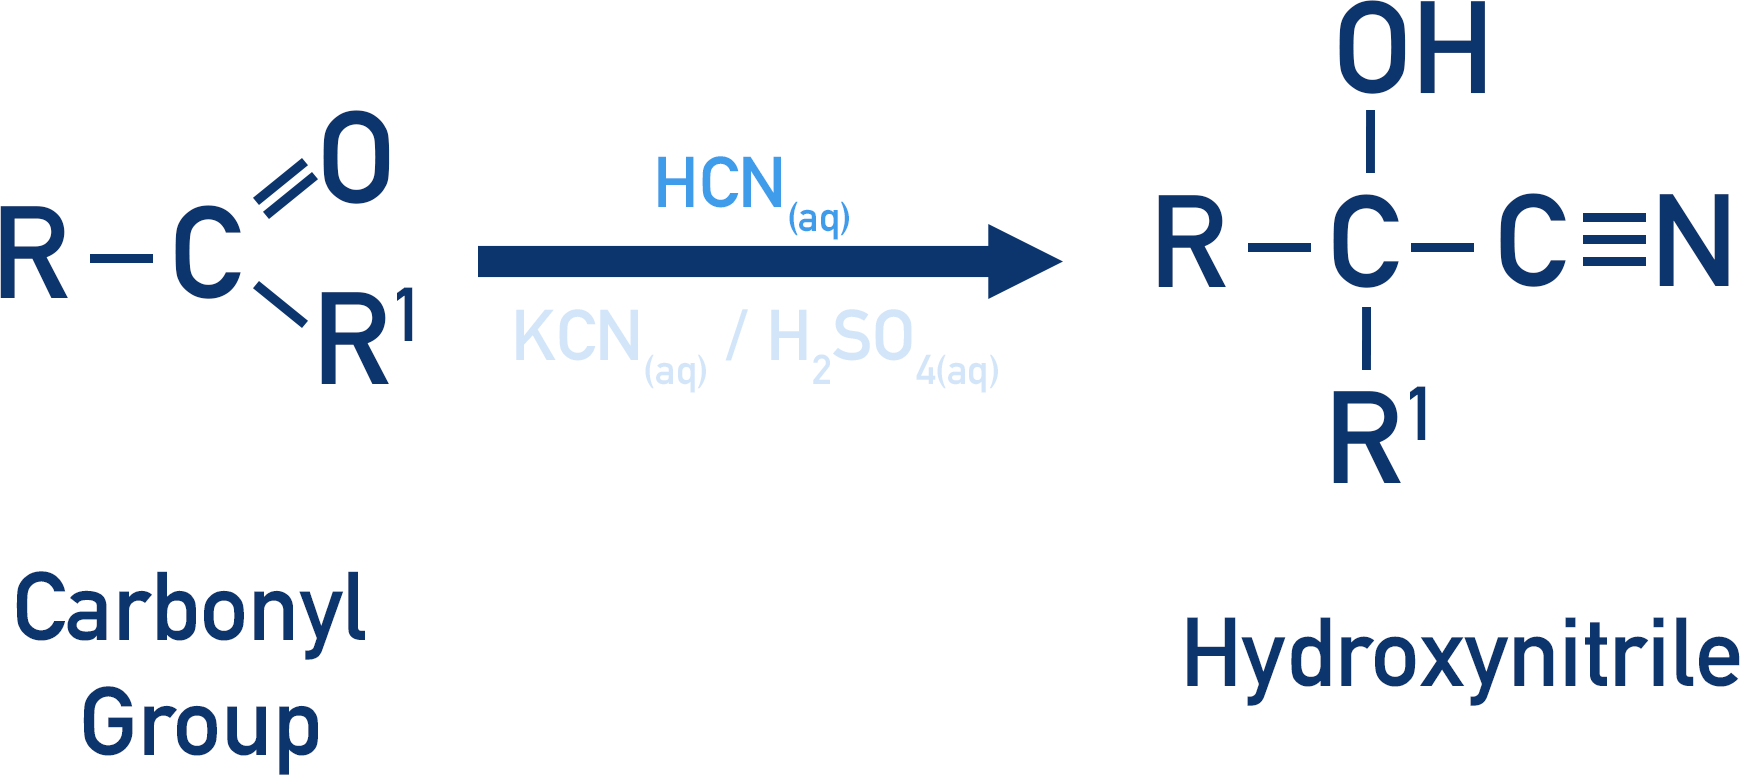 carbonyl with KCN and HCN to form Hydroxynitrile